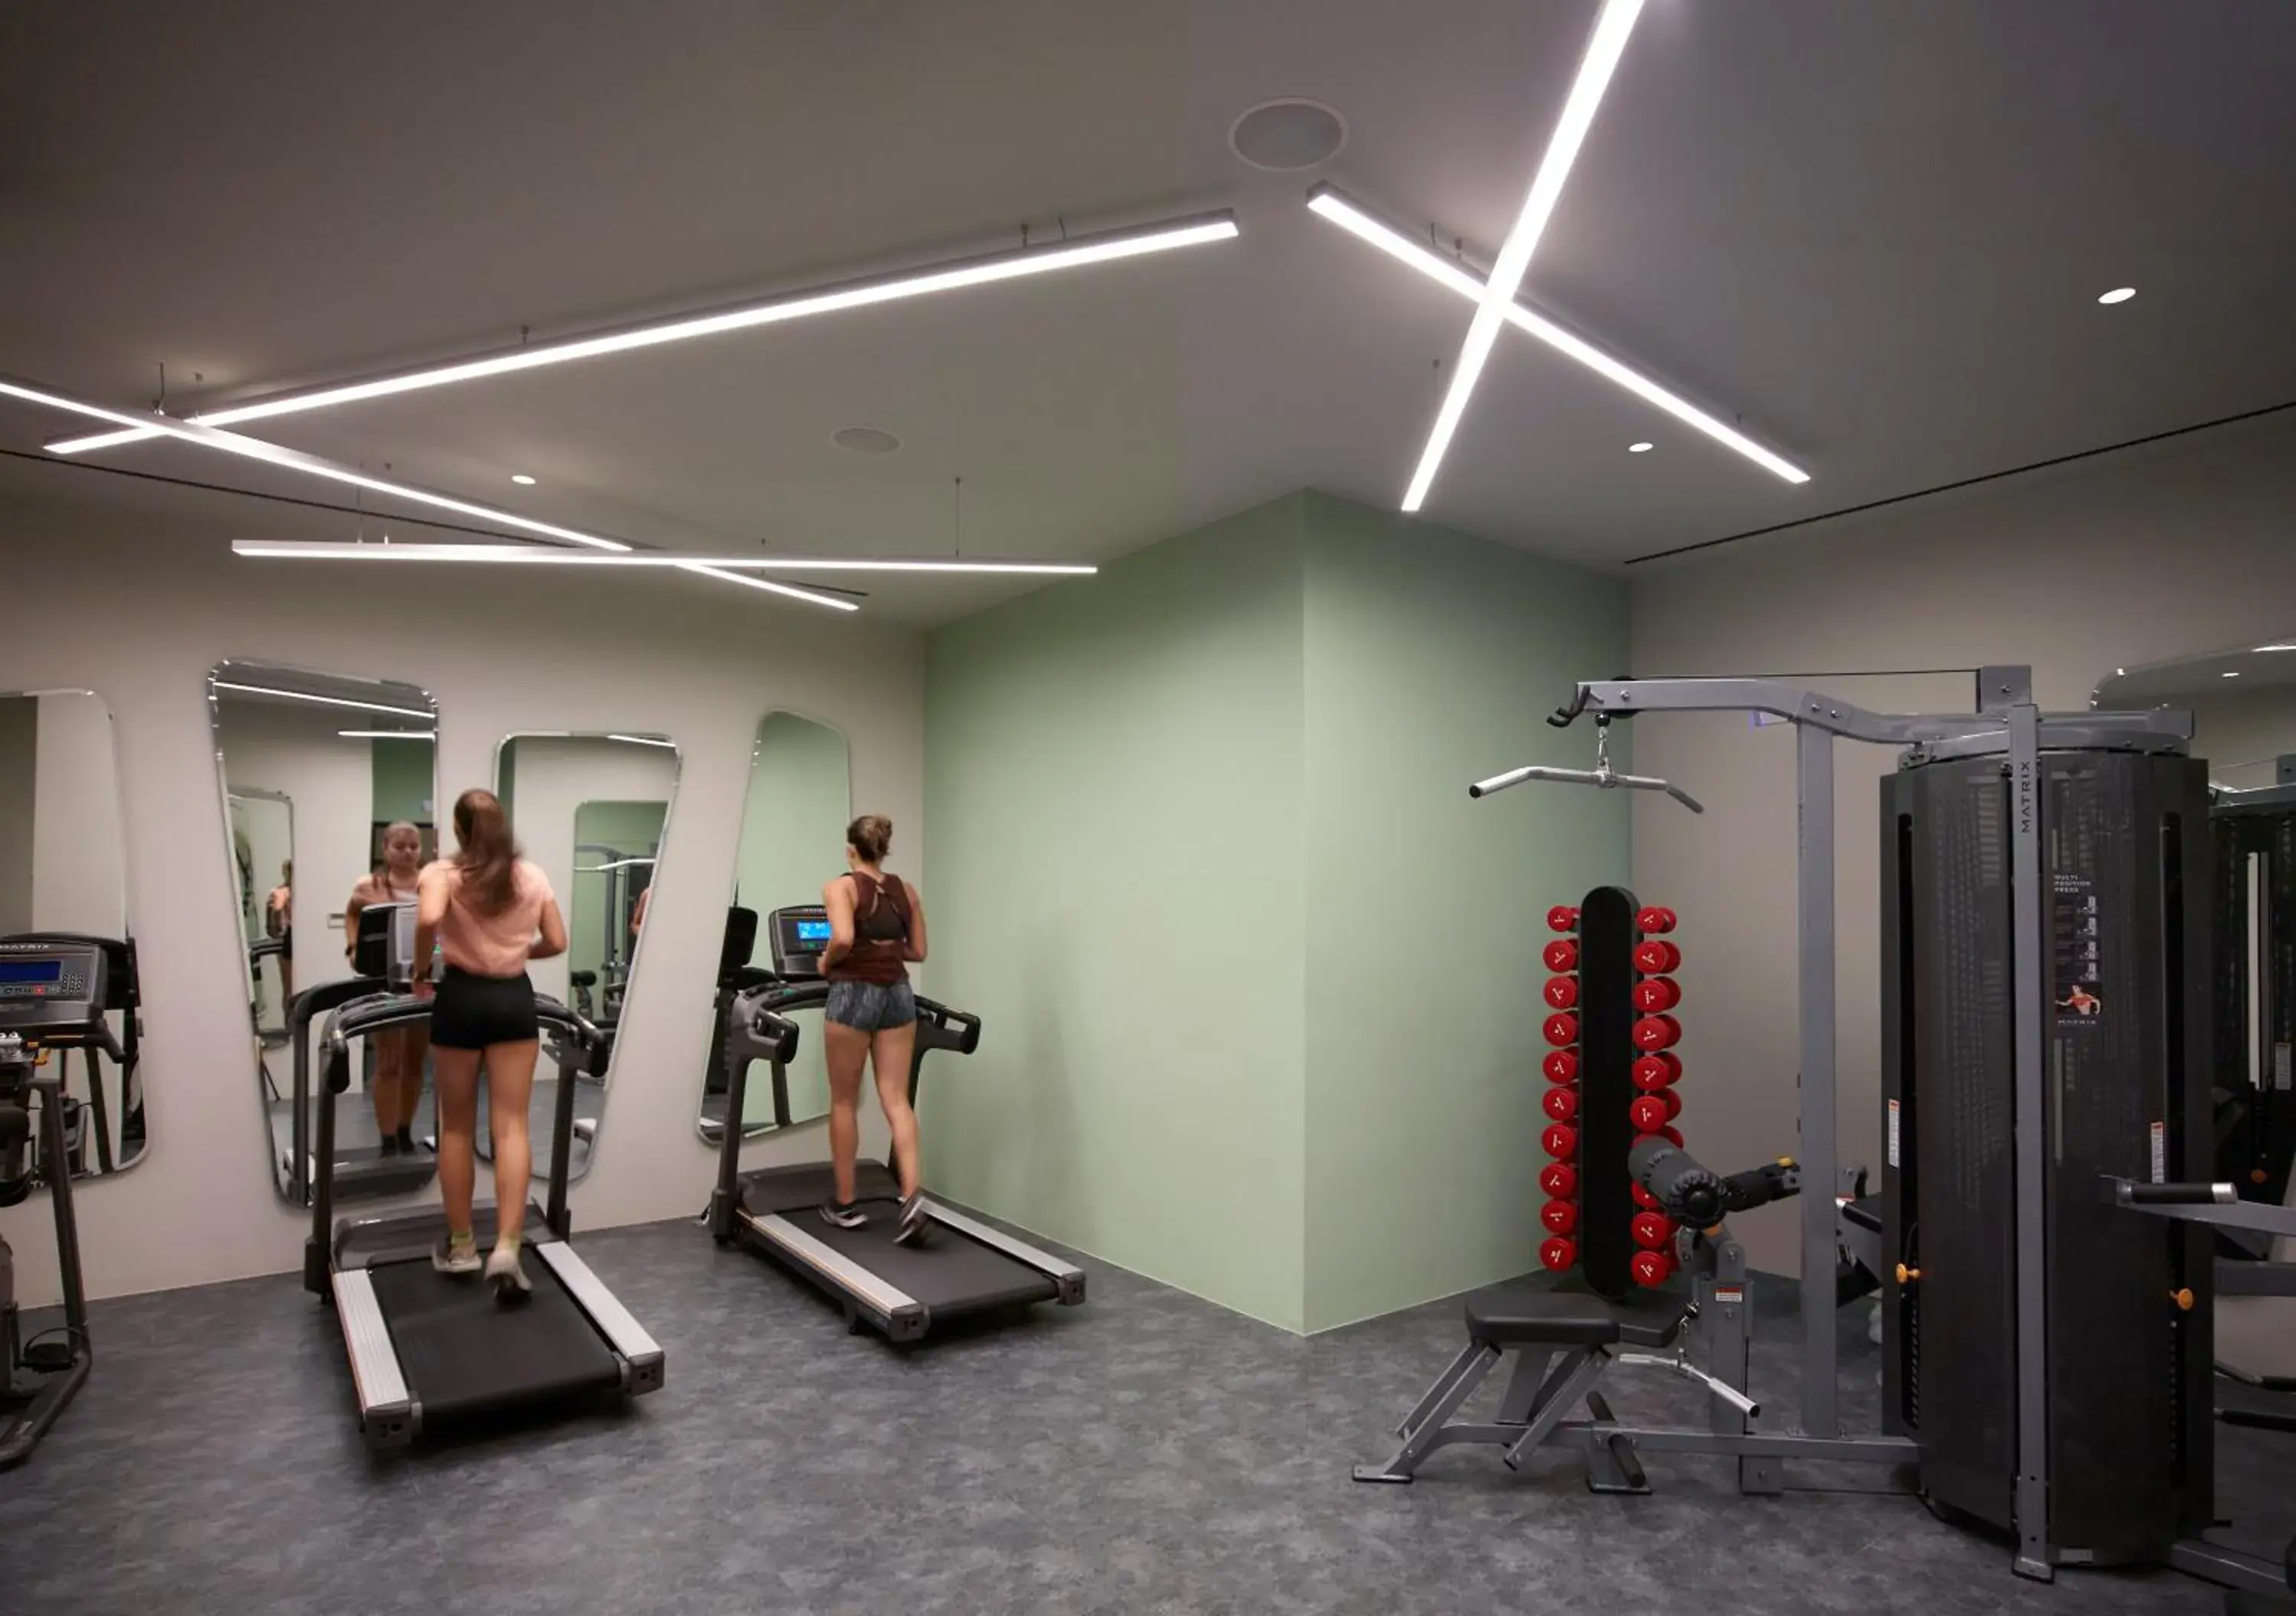 Fitness centre/facilities, Fitness Center/Facilities in Cayo Exclusive Resort & Spa